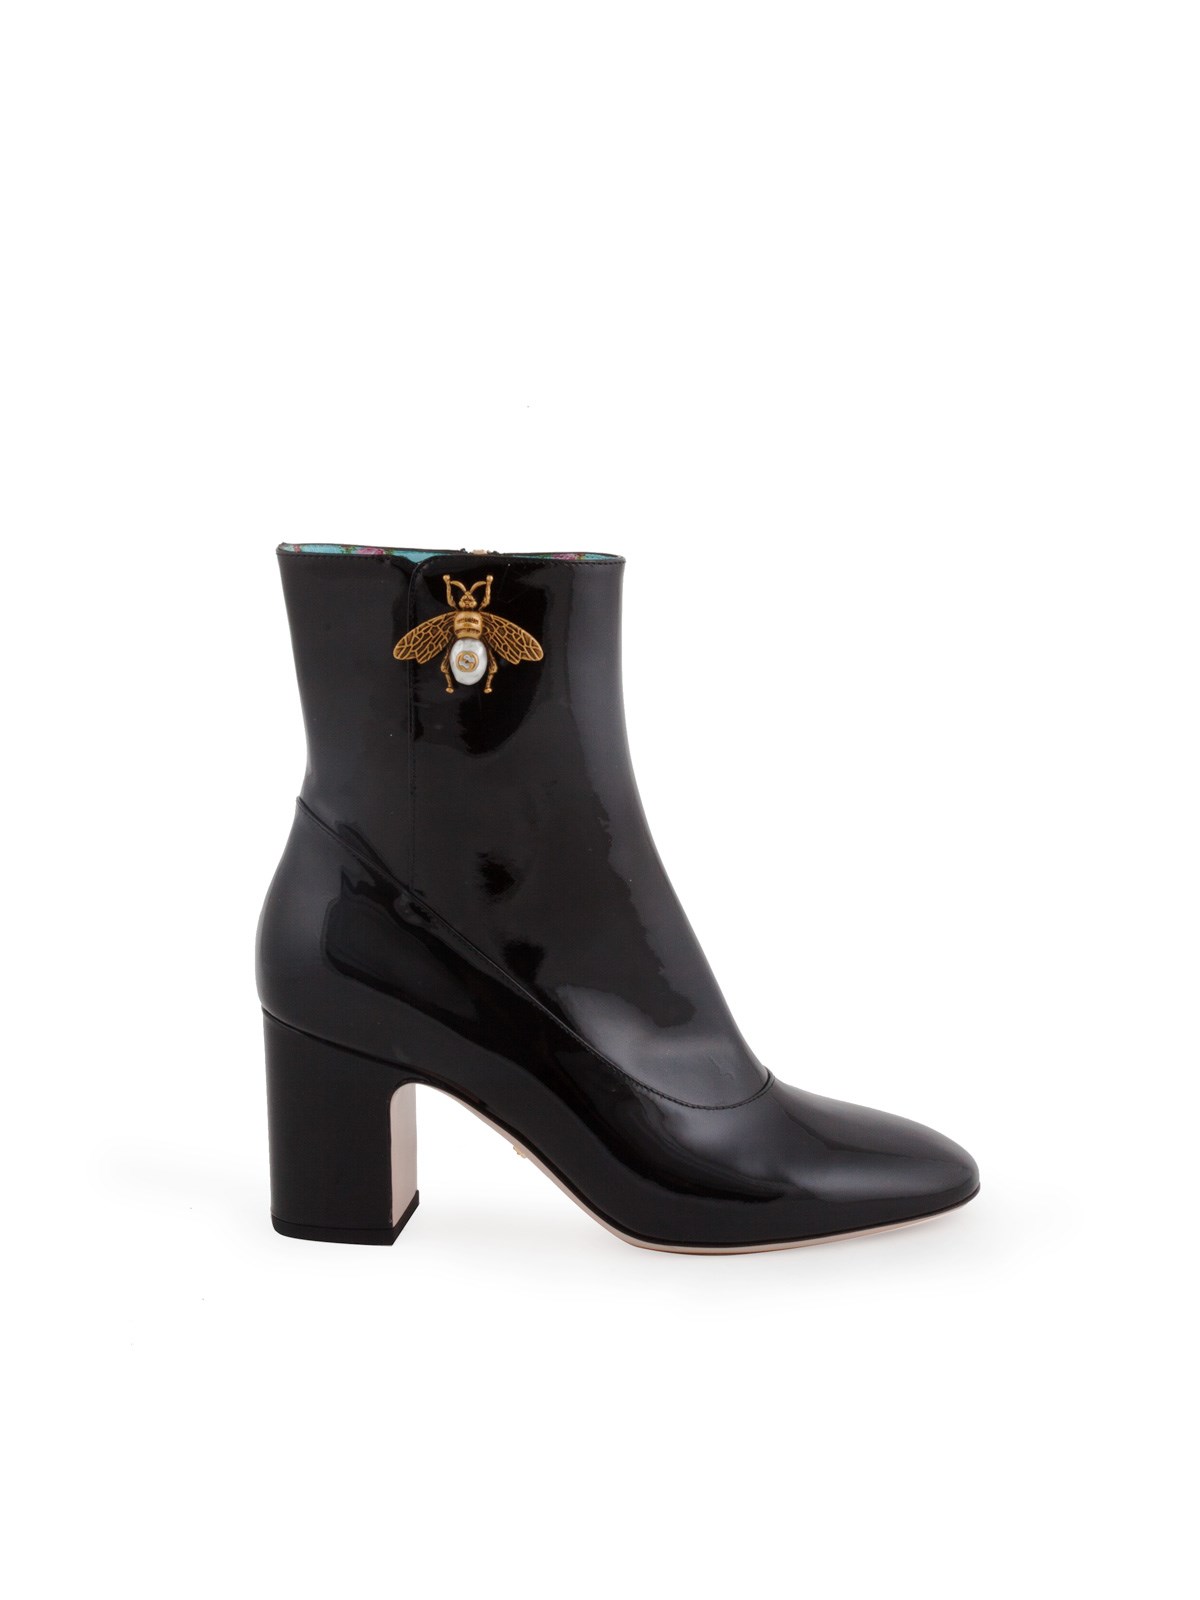 gucci black boots with bees